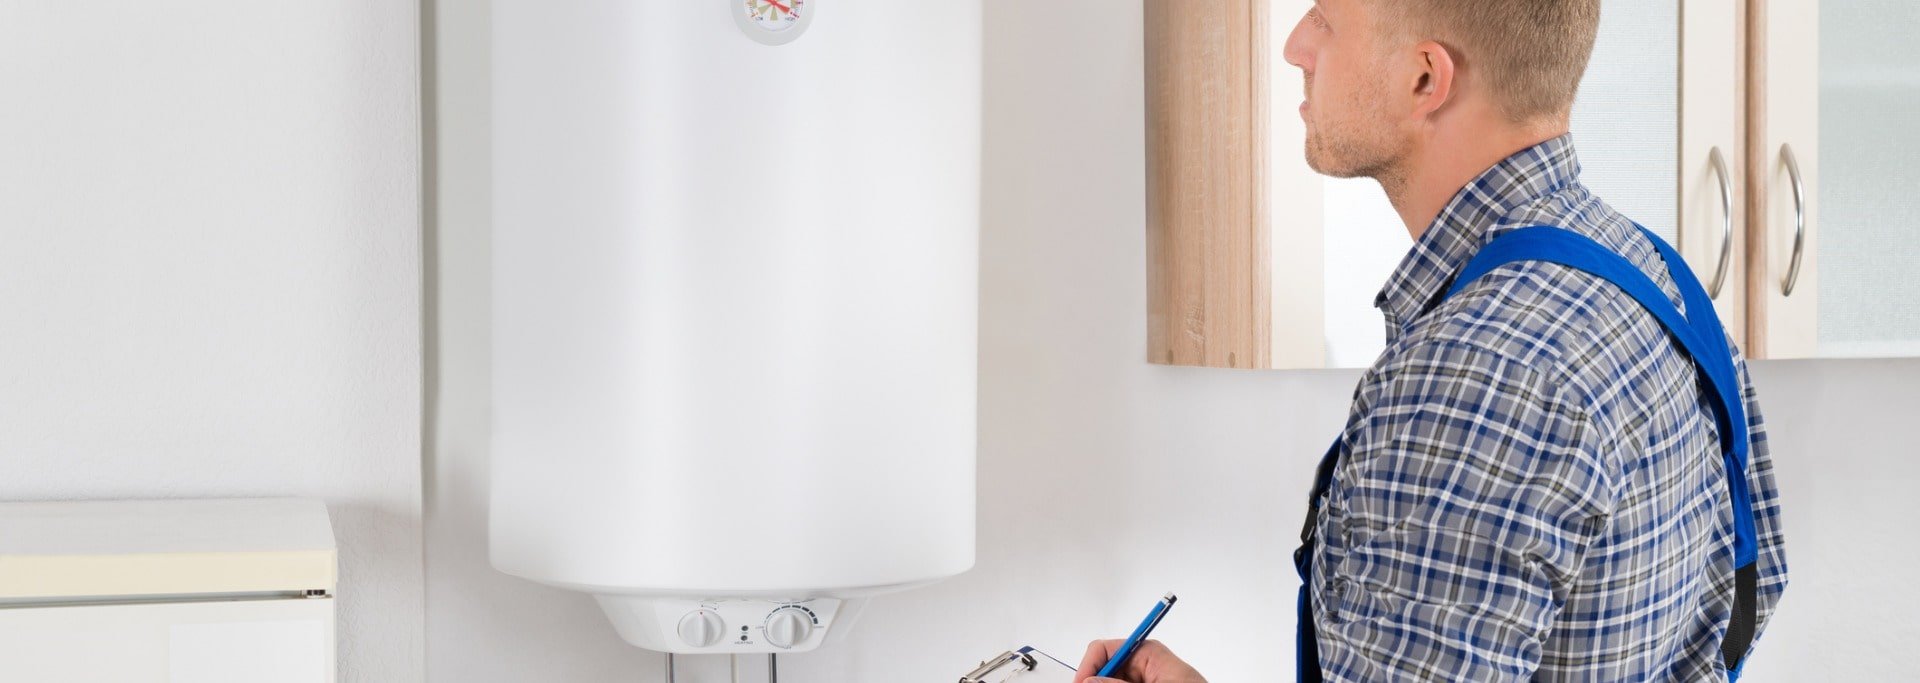 man-with-clipboard-while-looking-at-electric-boiler-picture-id516146516-min